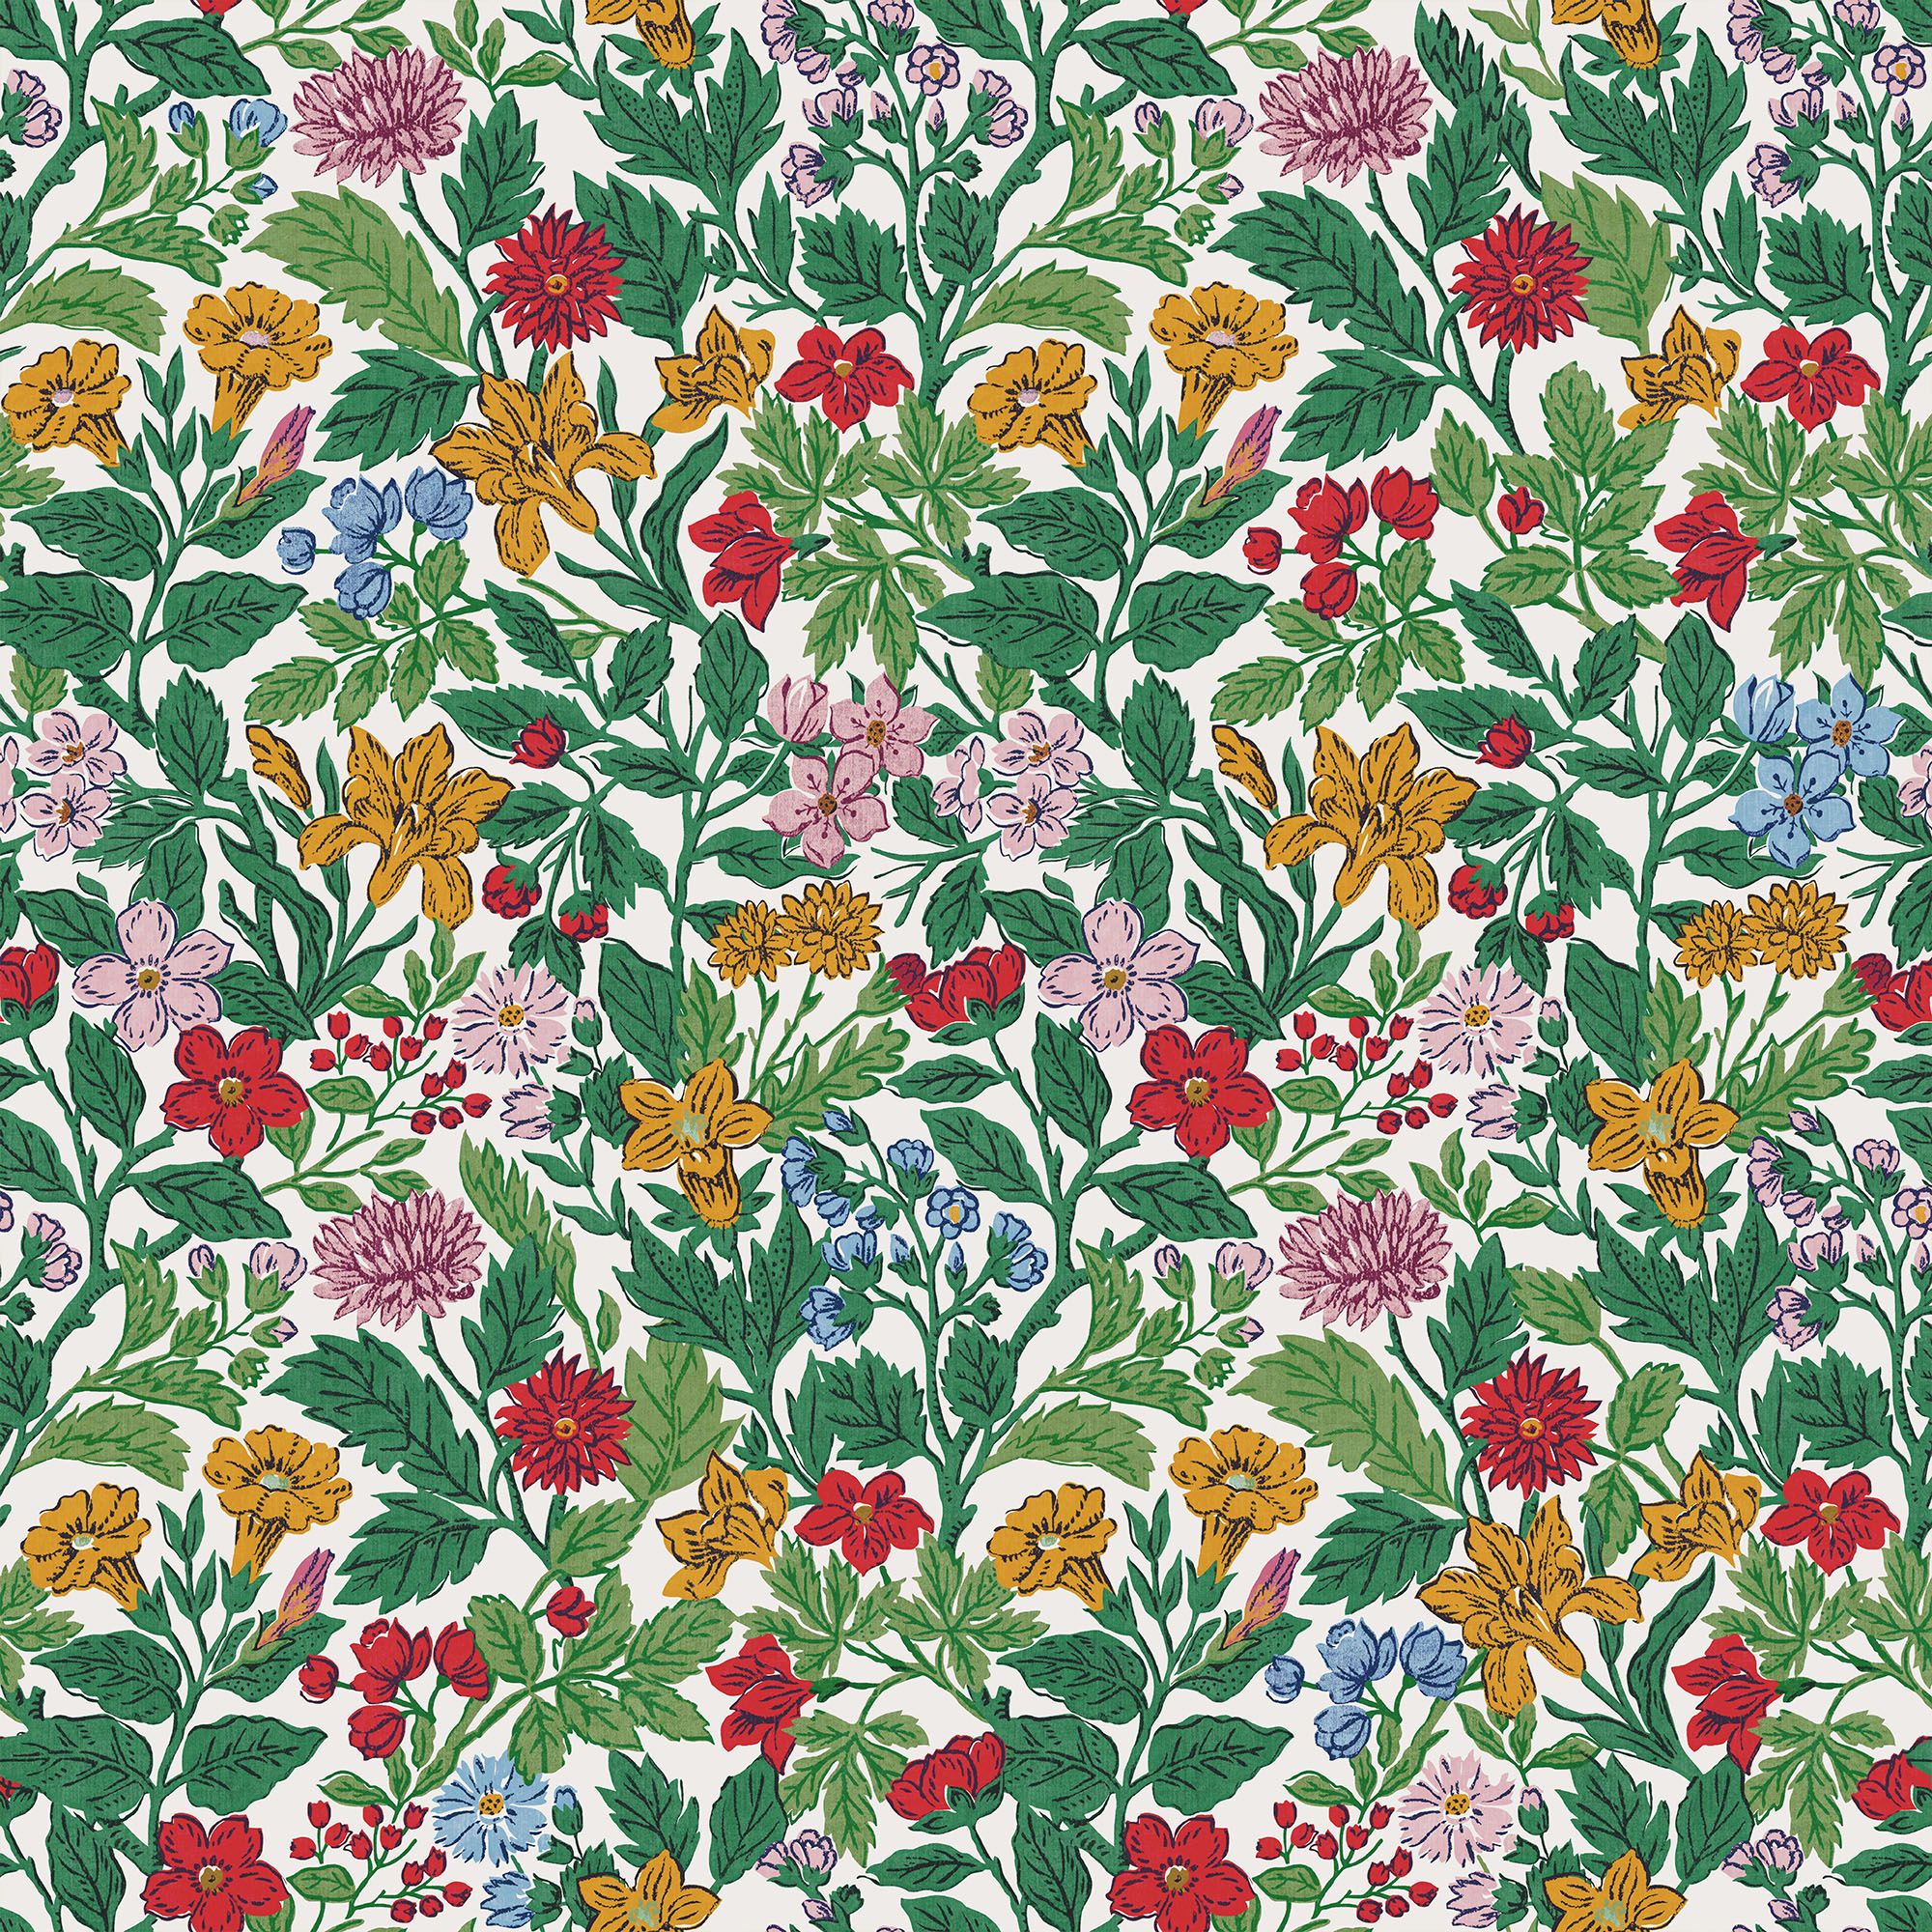 Joules Arts & crafts Multicolour Floral Smooth Wallpaper Sample